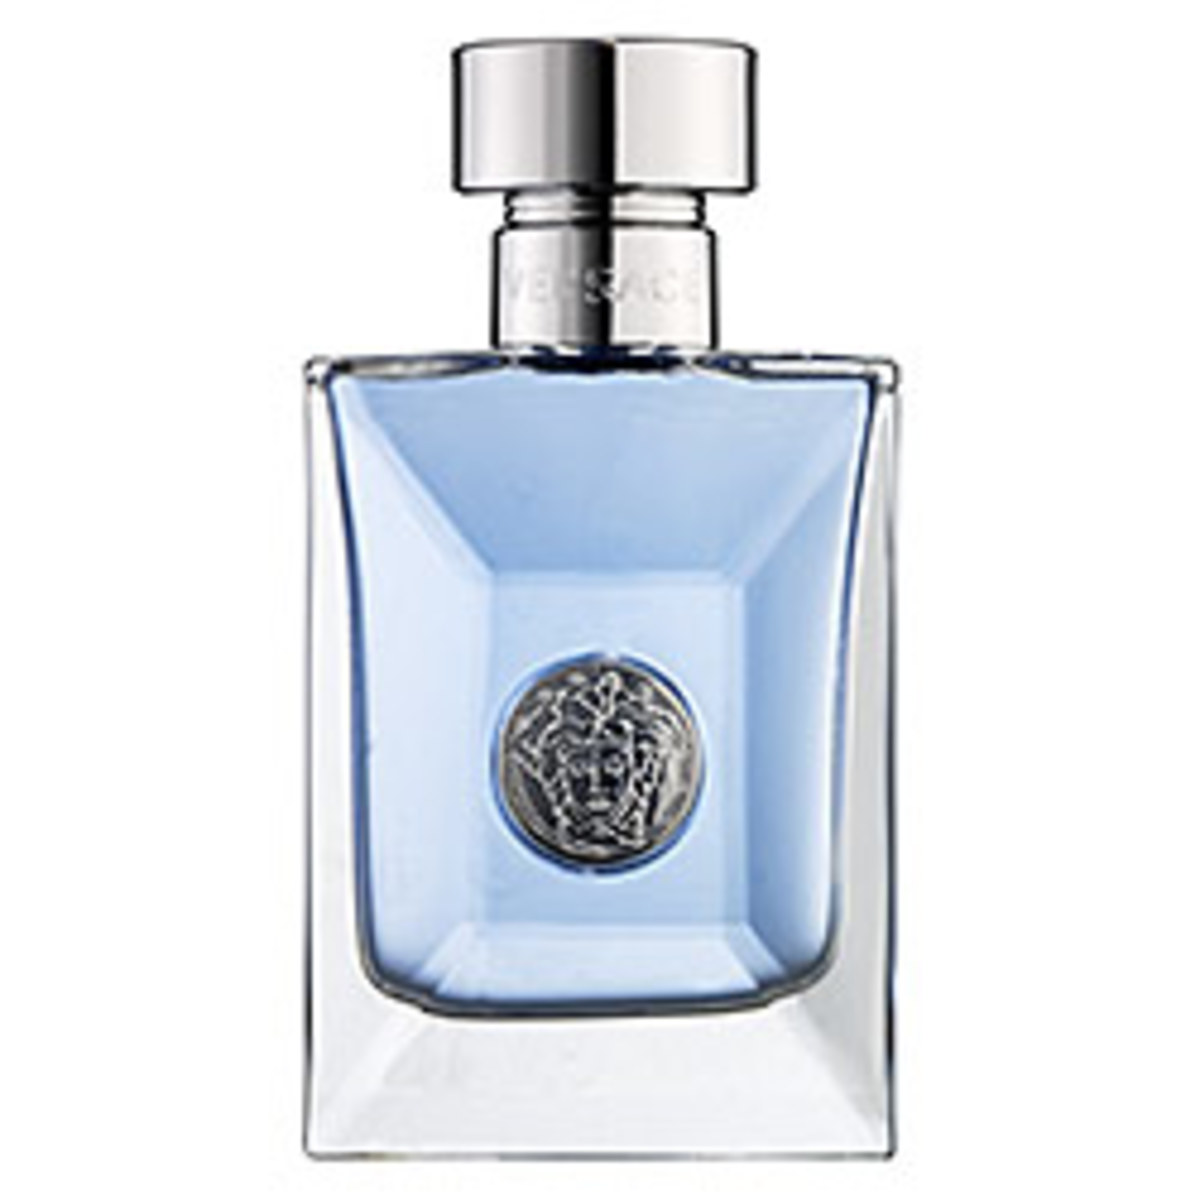 Versace Pour Homme - A Woody Oriental Fragrance